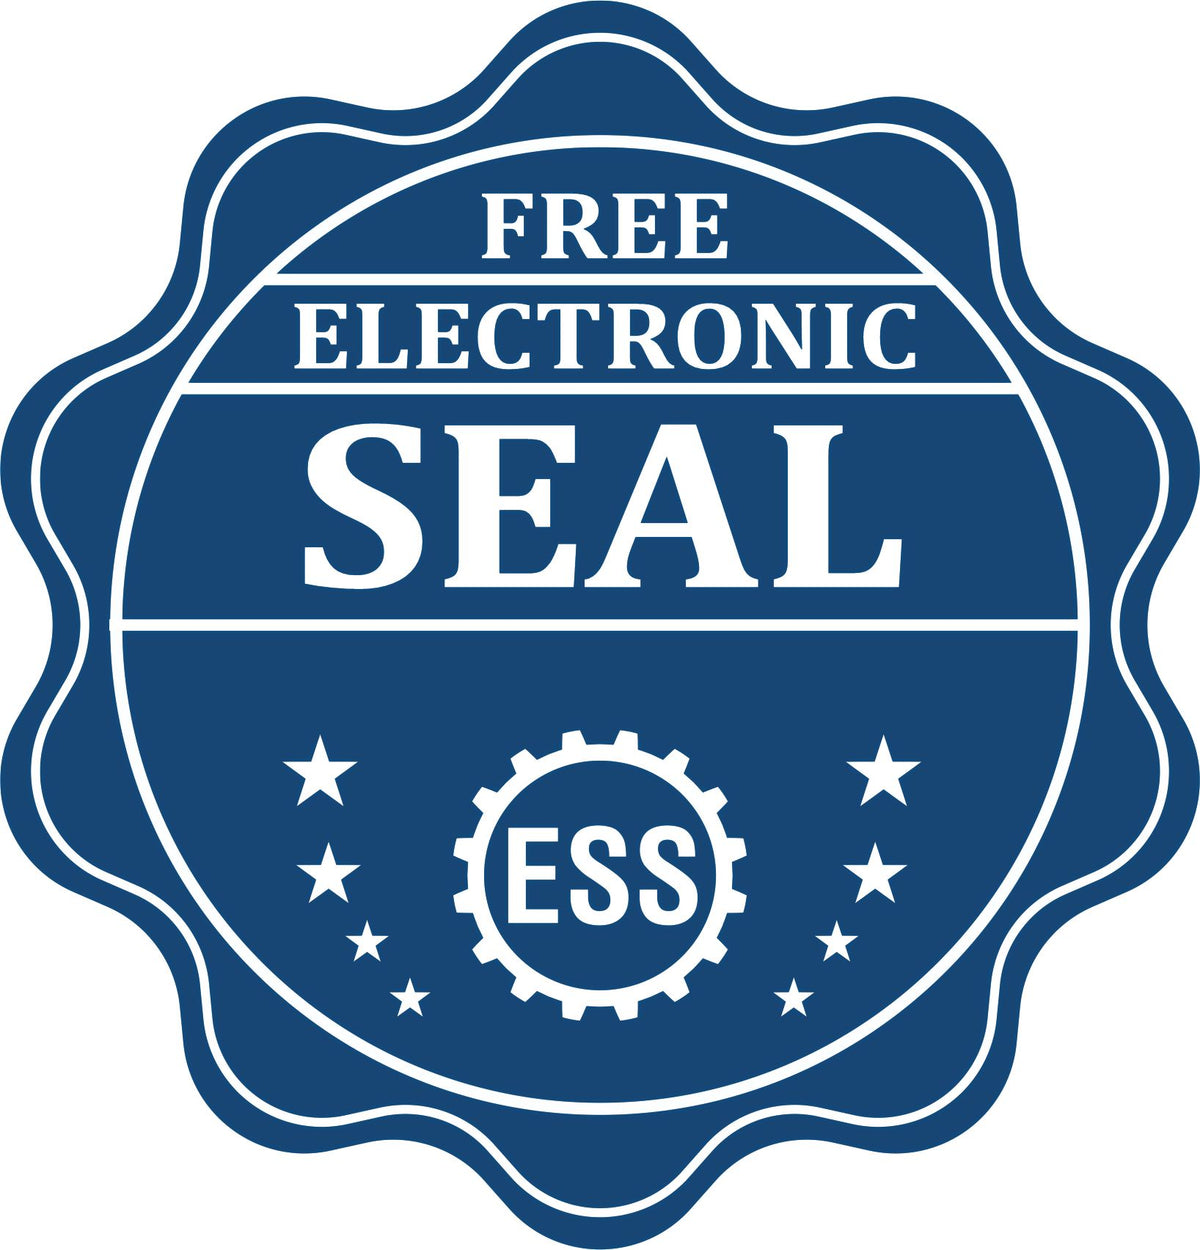 A badge showing a free electronic seal for the Slim Pre-Inked Connecticut Architect Seal Stamp with stars and the ESS gear on the emblem.